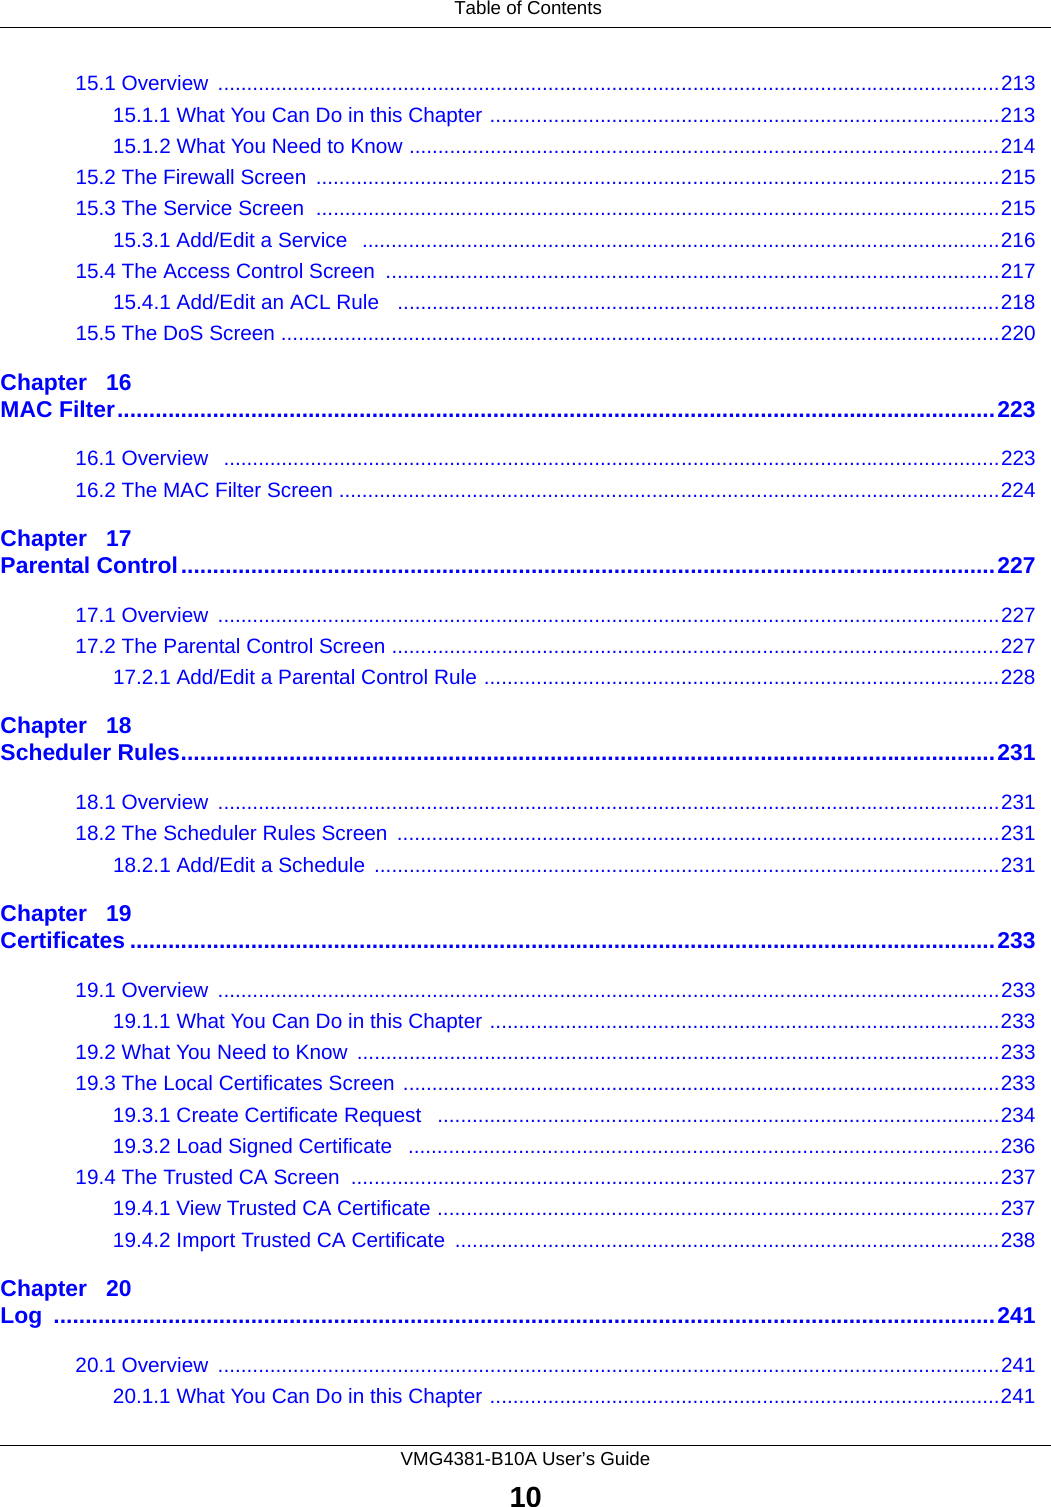 Table of ContentsVMG4381-B10A User’s Guide1015.1 Overview  .......................................................................................................................................21315.1.1 What You Can Do in this Chapter ........................................................................................21315.1.2 What You Need to Know ......................................................................................................21415.2 The Firewall Screen  ......................................................................................................................21515.3 The Service Screen  ......................................................................................................................21515.3.1 Add/Edit a Service   ..............................................................................................................21615.4 The Access Control Screen  ..........................................................................................................21715.4.1 Add/Edit an ACL Rule   ........................................................................................................21815.5 The DoS Screen ............................................................................................................................220Chapter   16MAC Filter..........................................................................................................................................22316.1 Overview   ......................................................................................................................................22316.2 The MAC Filter Screen ..................................................................................................................224Chapter   17Parental Control................................................................................................................................22717.1 Overview  .......................................................................................................................................22717.2 The Parental Control Screen .........................................................................................................22717.2.1 Add/Edit a Parental Control Rule .........................................................................................228Chapter   18Scheduler Rules................................................................................................................................23118.1 Overview  .......................................................................................................................................23118.2 The Scheduler Rules Screen  ........................................................................................................23118.2.1 Add/Edit a Schedule  ............................................................................................................231Chapter   19Certificates ........................................................................................................................................23319.1 Overview  .......................................................................................................................................23319.1.1 What You Can Do in this Chapter ........................................................................................23319.2 What You Need to Know  ...............................................................................................................23319.3 The Local Certificates Screen .......................................................................................................23319.3.1 Create Certificate Request   .................................................................................................23419.3.2 Load Signed Certificate   ......................................................................................................23619.4 The Trusted CA Screen ................................................................................................................23719.4.1 View Trusted CA Certificate .................................................................................................23719.4.2 Import Trusted CA Certificate  ..............................................................................................238Chapter   20Log ....................................................................................................................................................24120.1 Overview  .......................................................................................................................................24120.1.1 What You Can Do in this Chapter ........................................................................................241